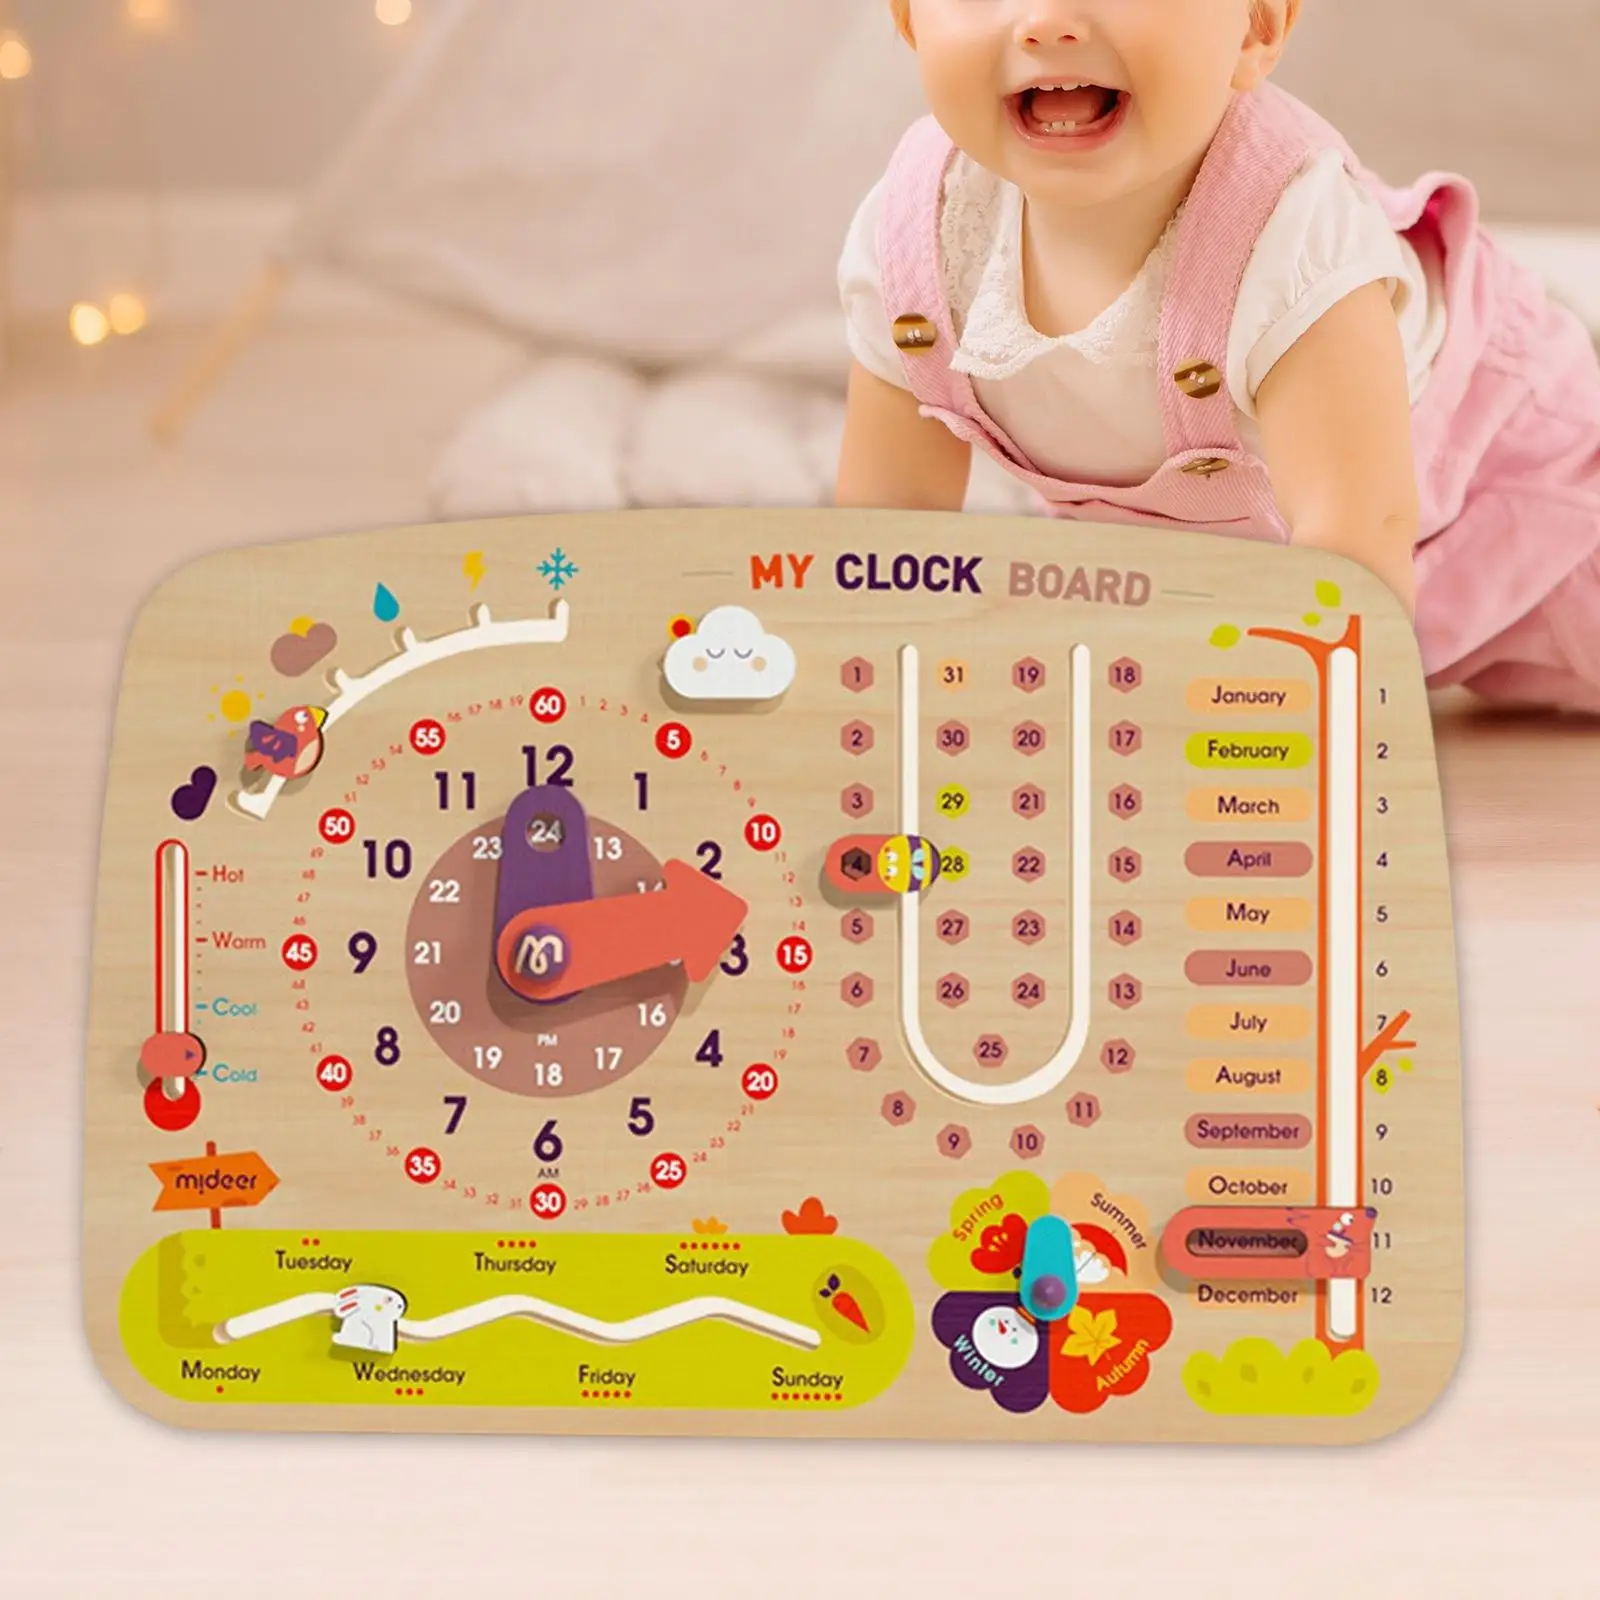 

Kids Clock Calendar Early Learning Toy Days Clock Months Teaching Clock Learning Materials for Boys Girls Toddlers Kids 4 5 6